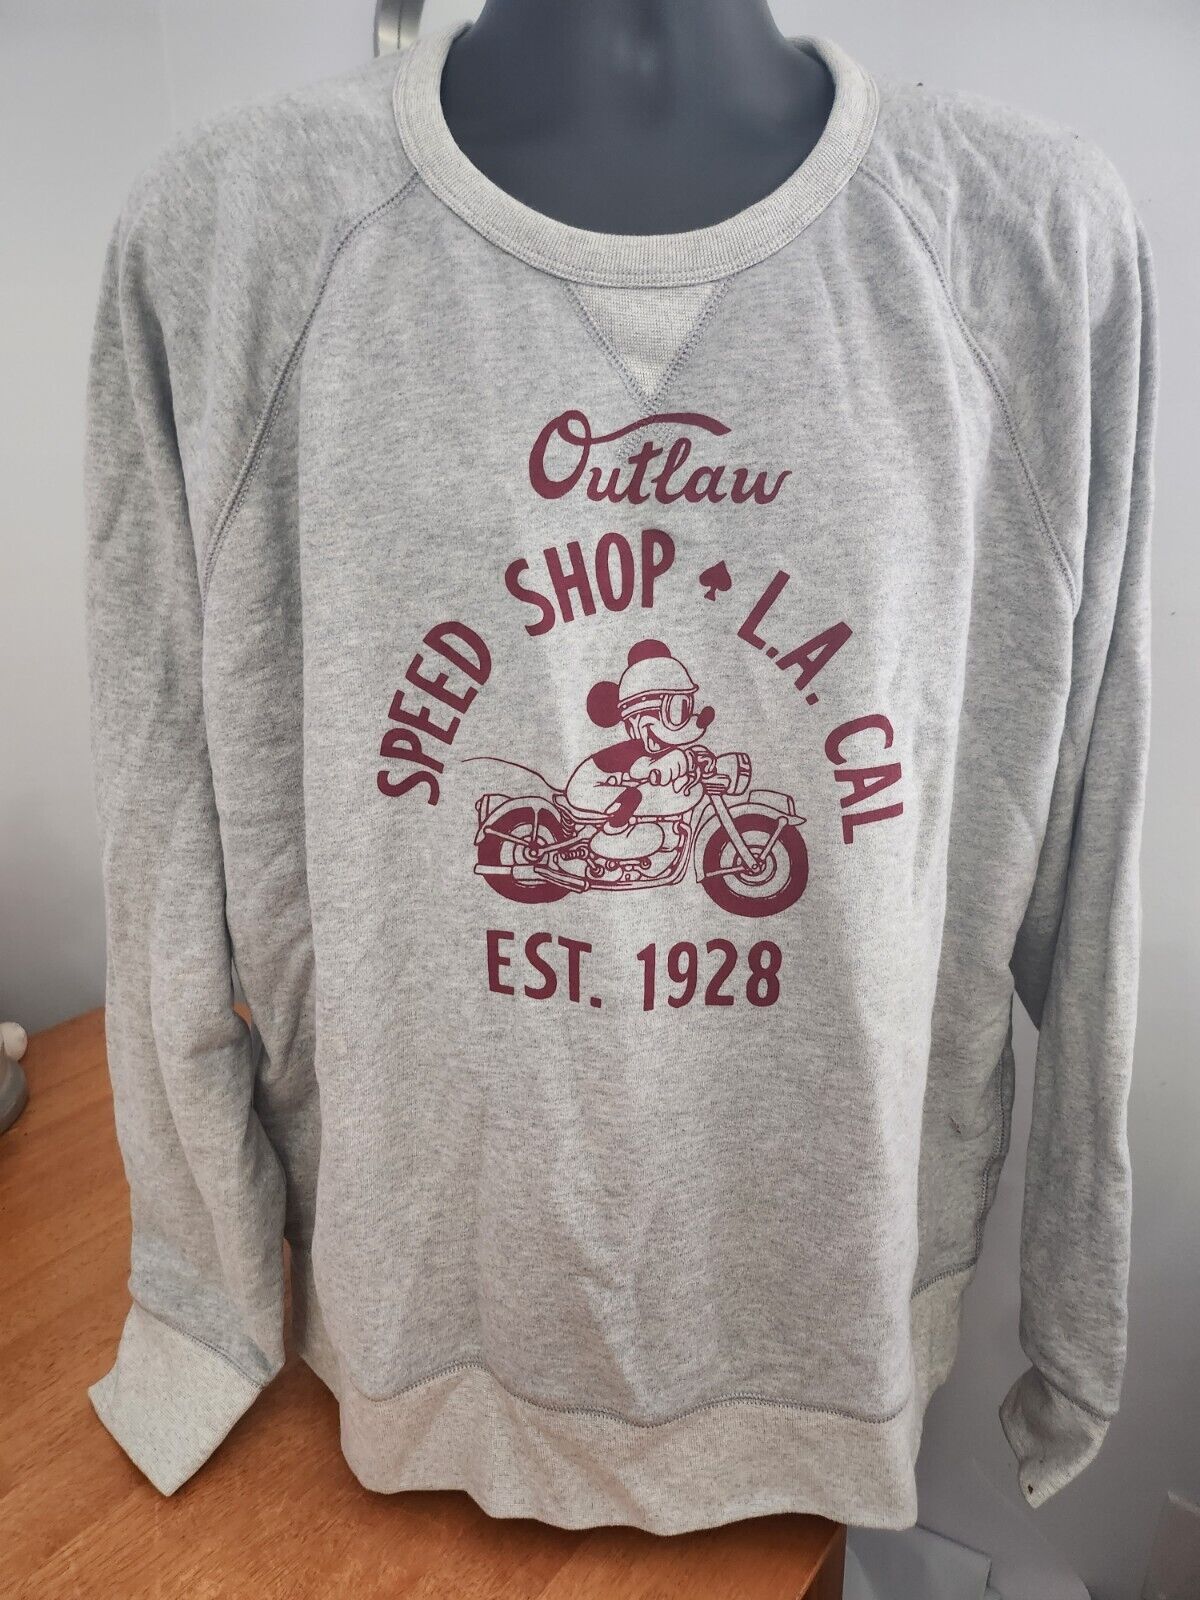 New Gap Disney Mickey Mouse Speed Shop Outlaw Sweatshirt Mens 2XL Motorcycle